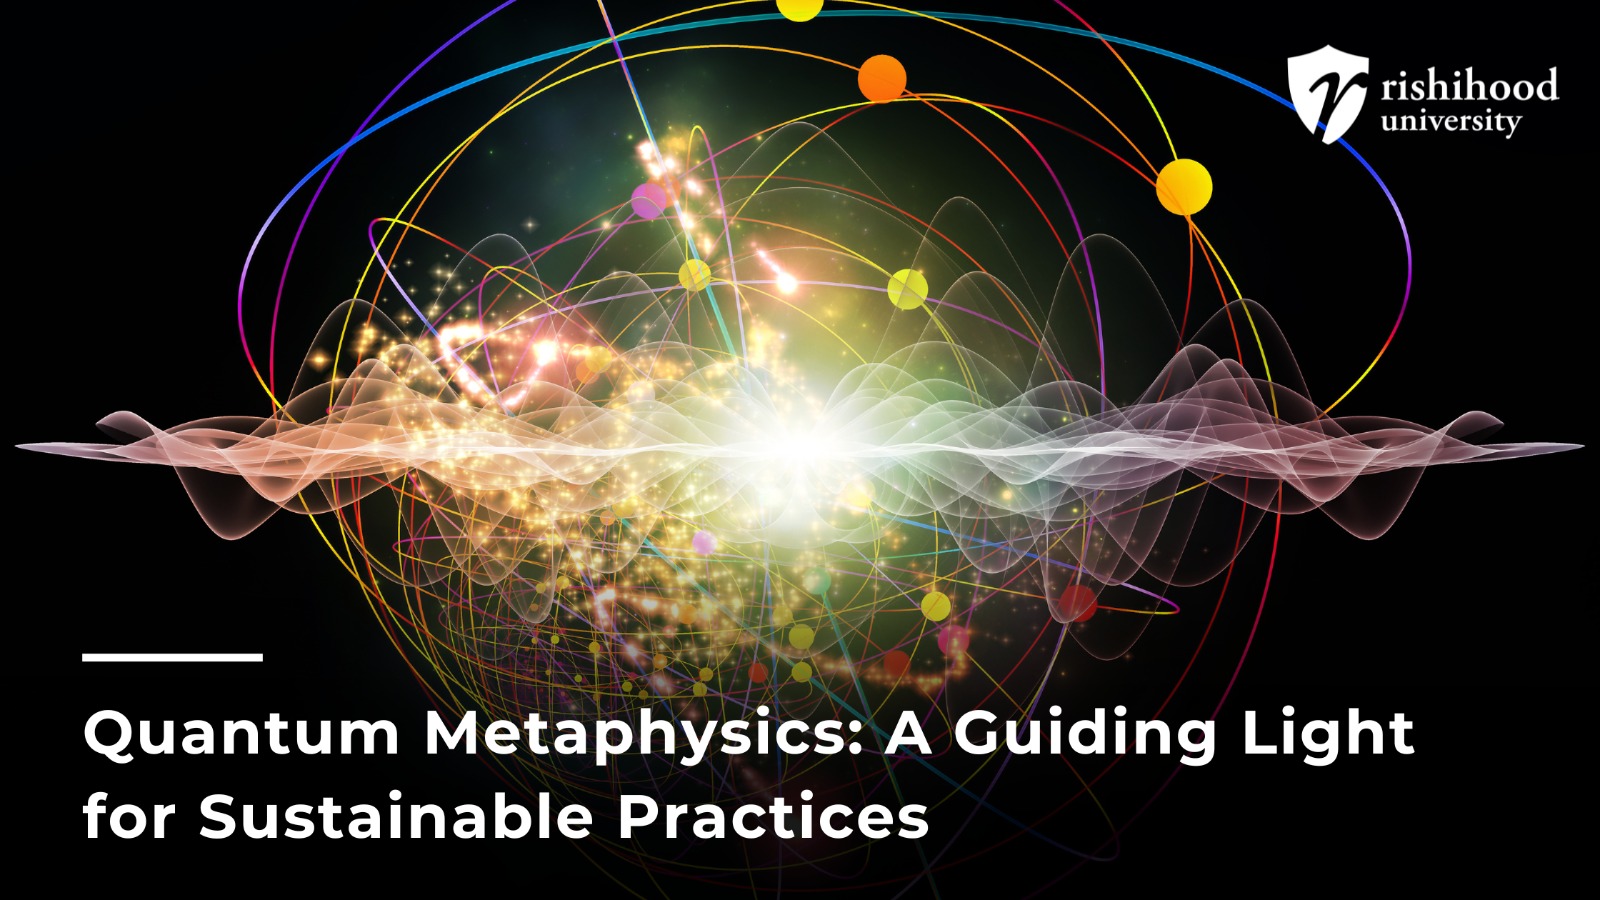 Quantum Metaphysics: A Guiding Light for Sustainable Practices